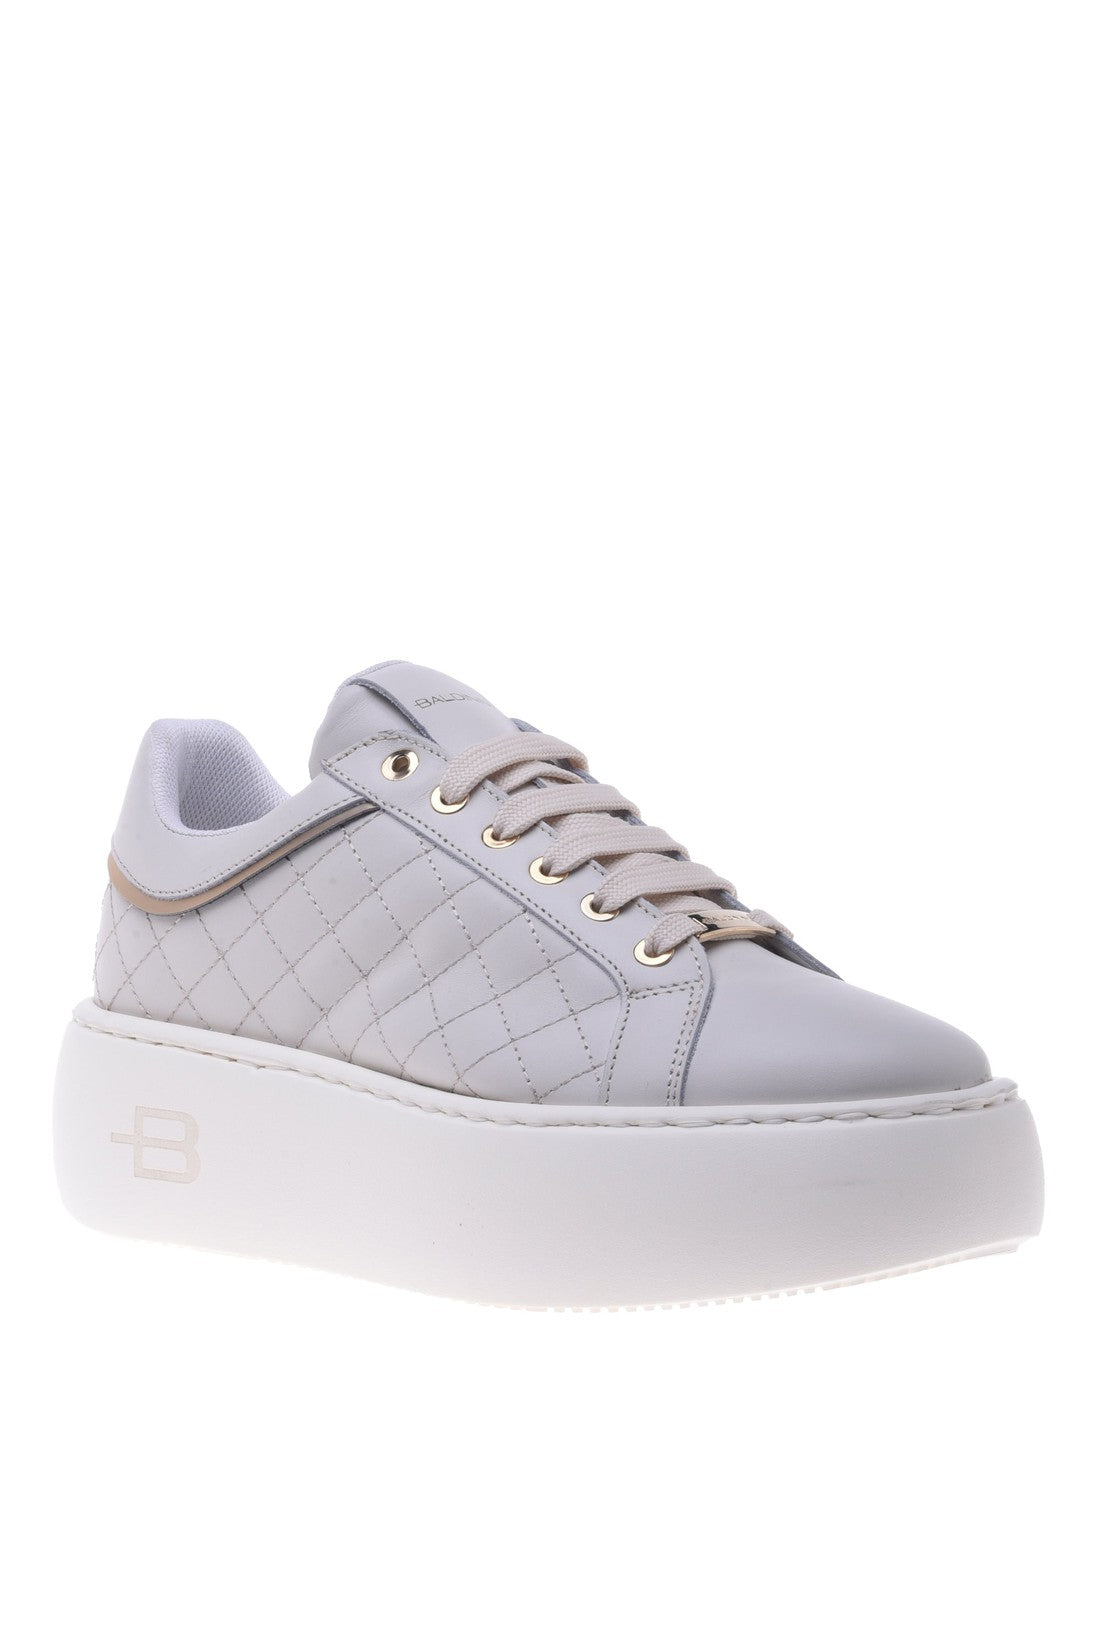 BALDININI-OUTLET-SALE-Sneaker-in-white-quilted-leather-Sneaker-35-ARCHIVE-COLLECTION.jpg